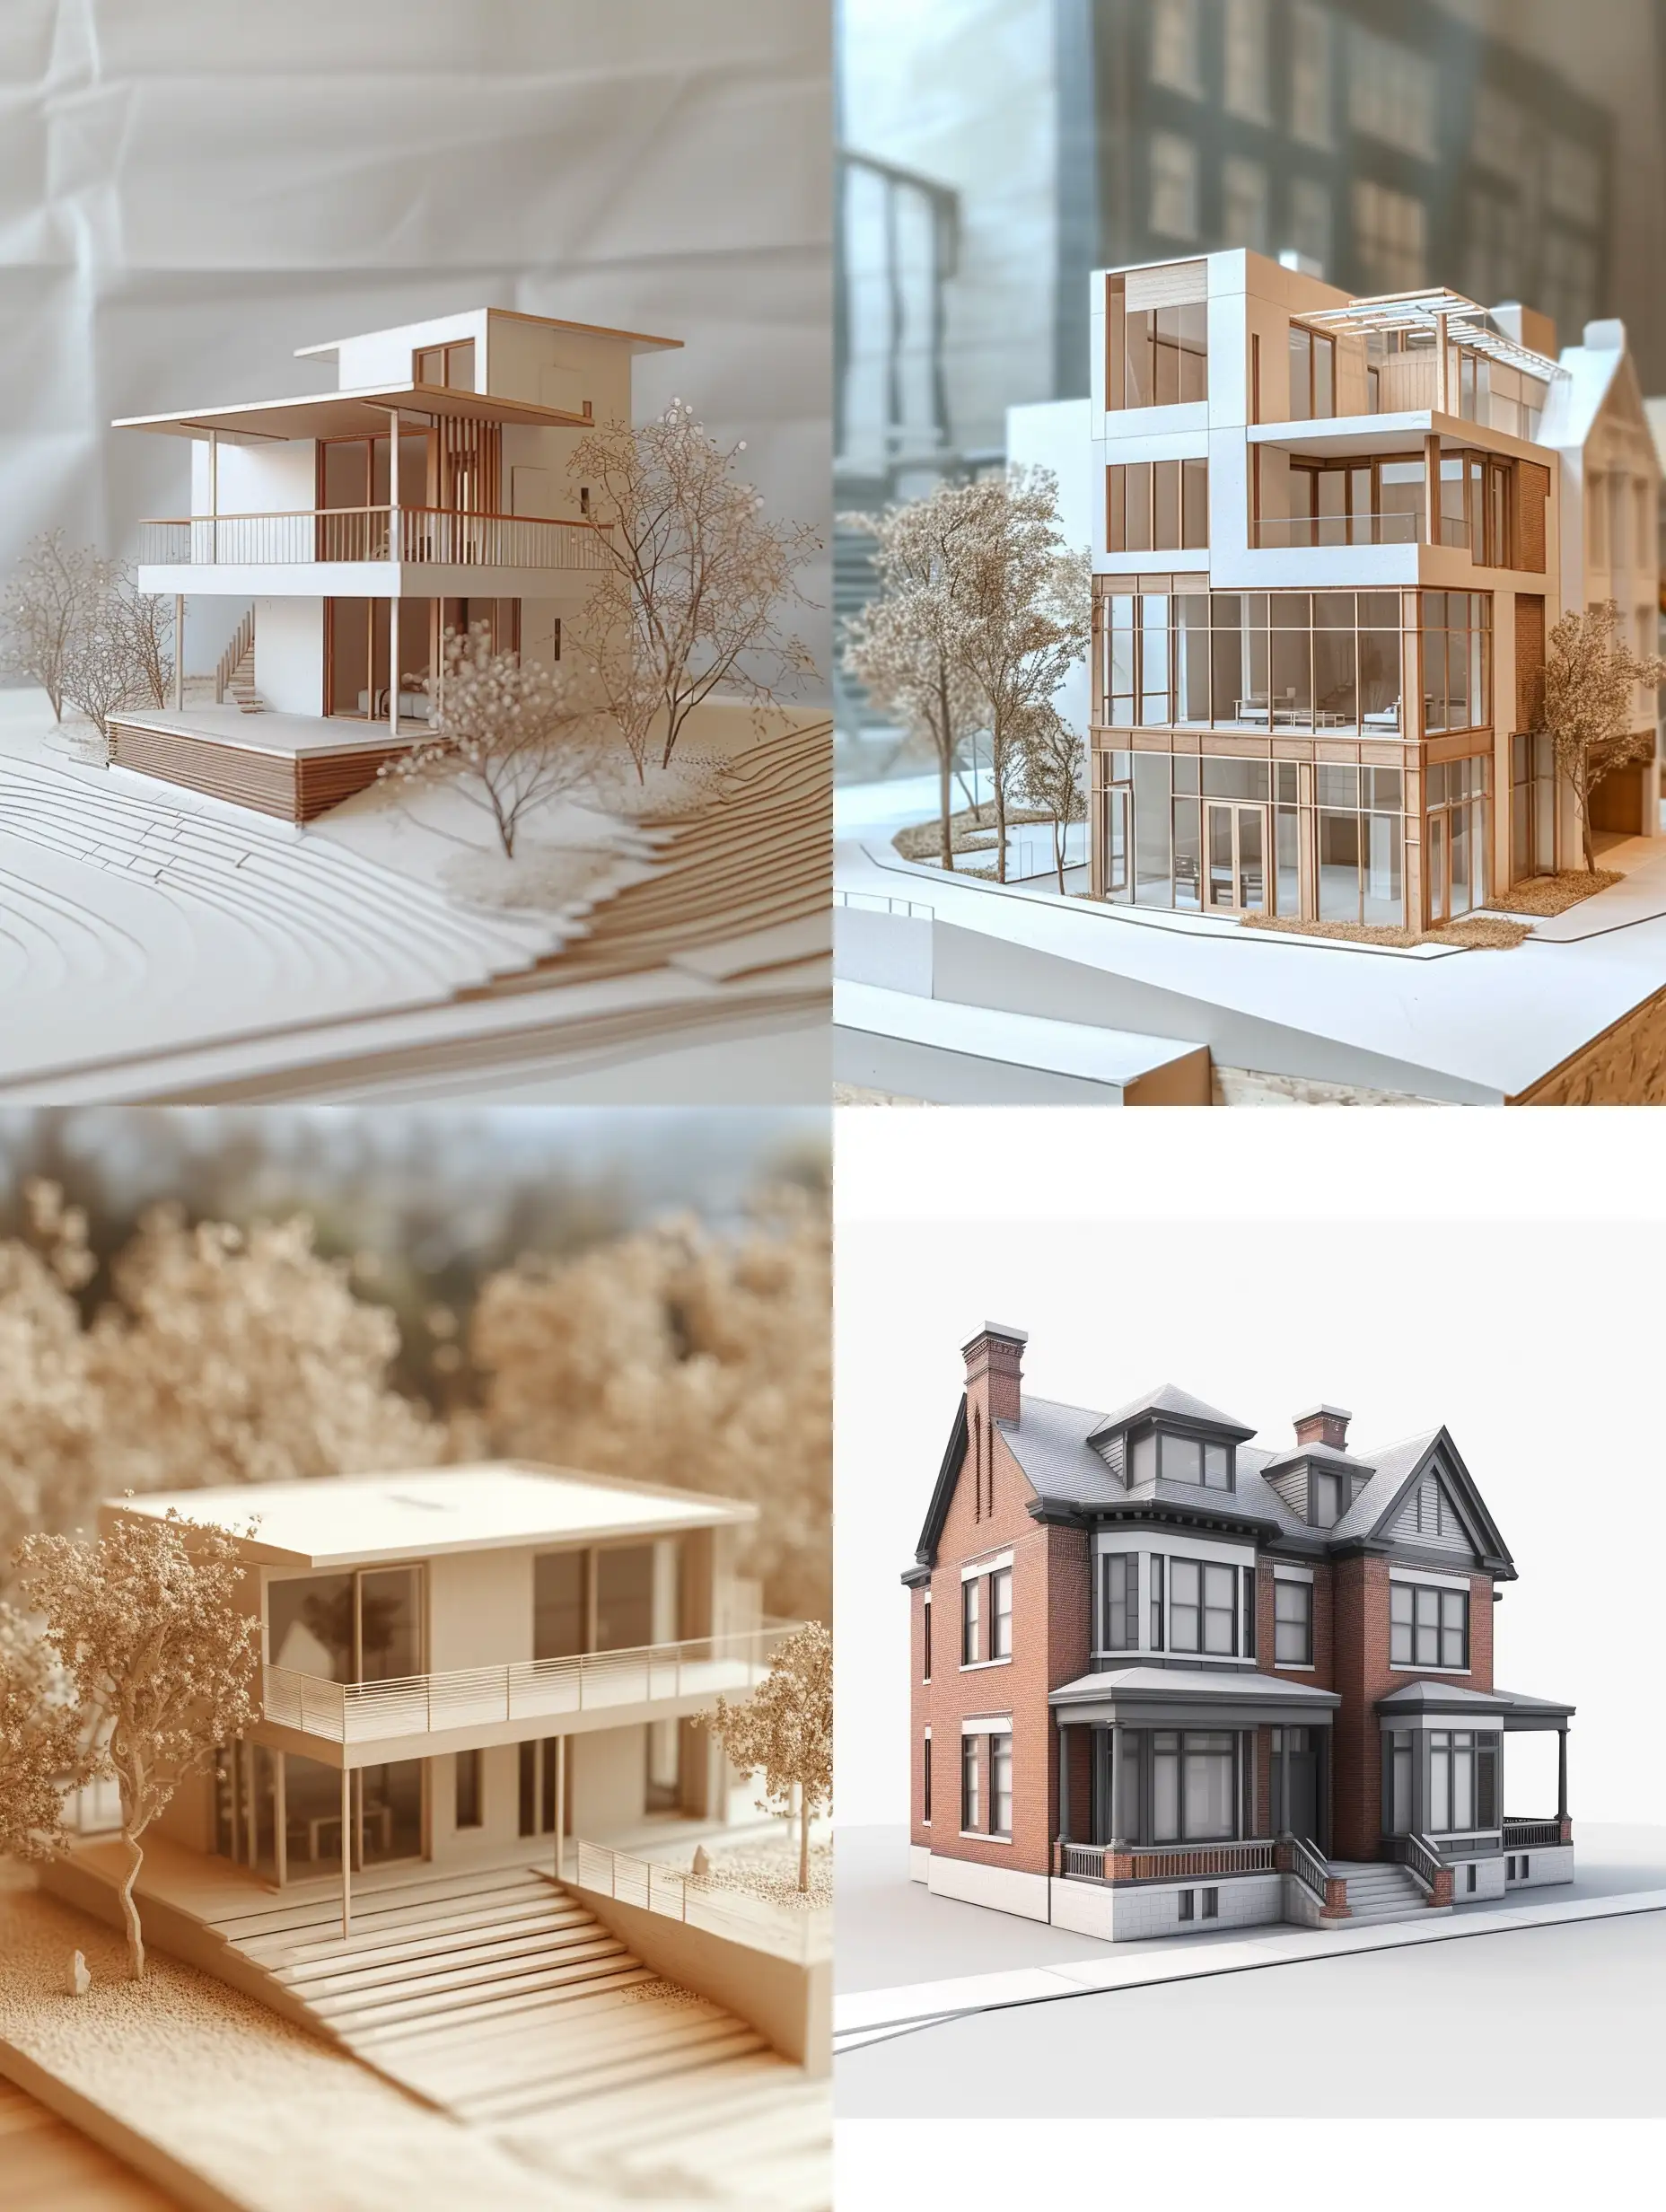 Architectural-Model-Before-and-After-Rendering-Modern-Design-Transformation